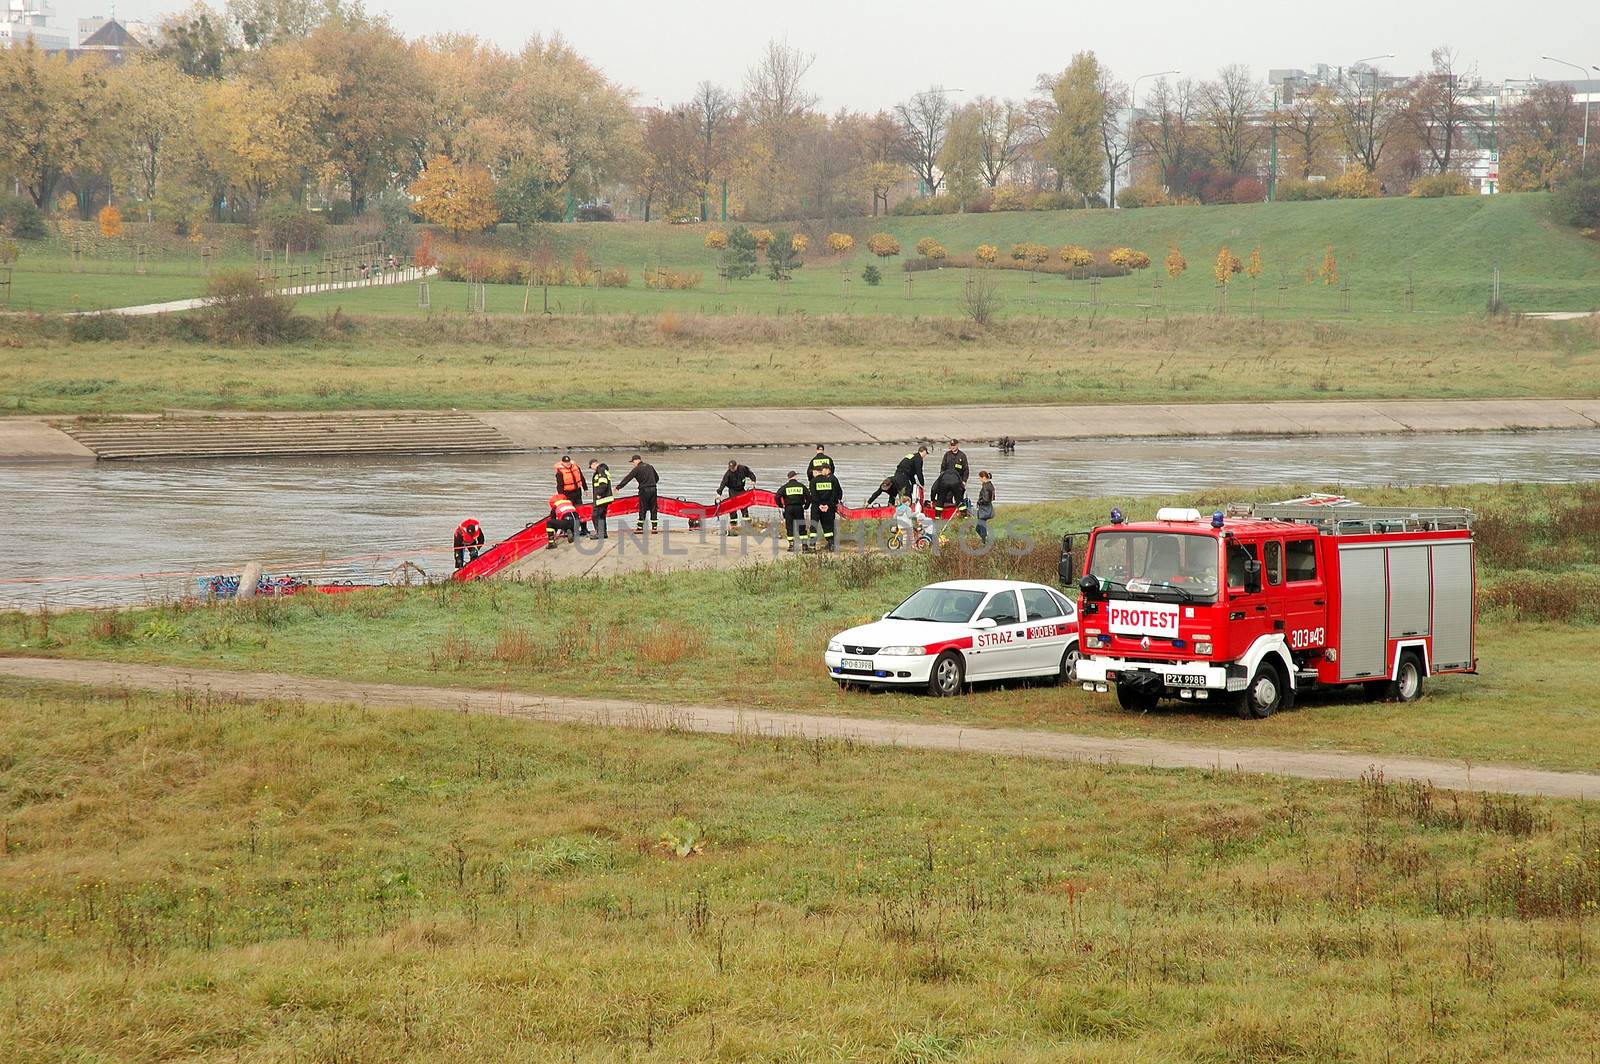 Fire brigade exercises on river bank by janhetman